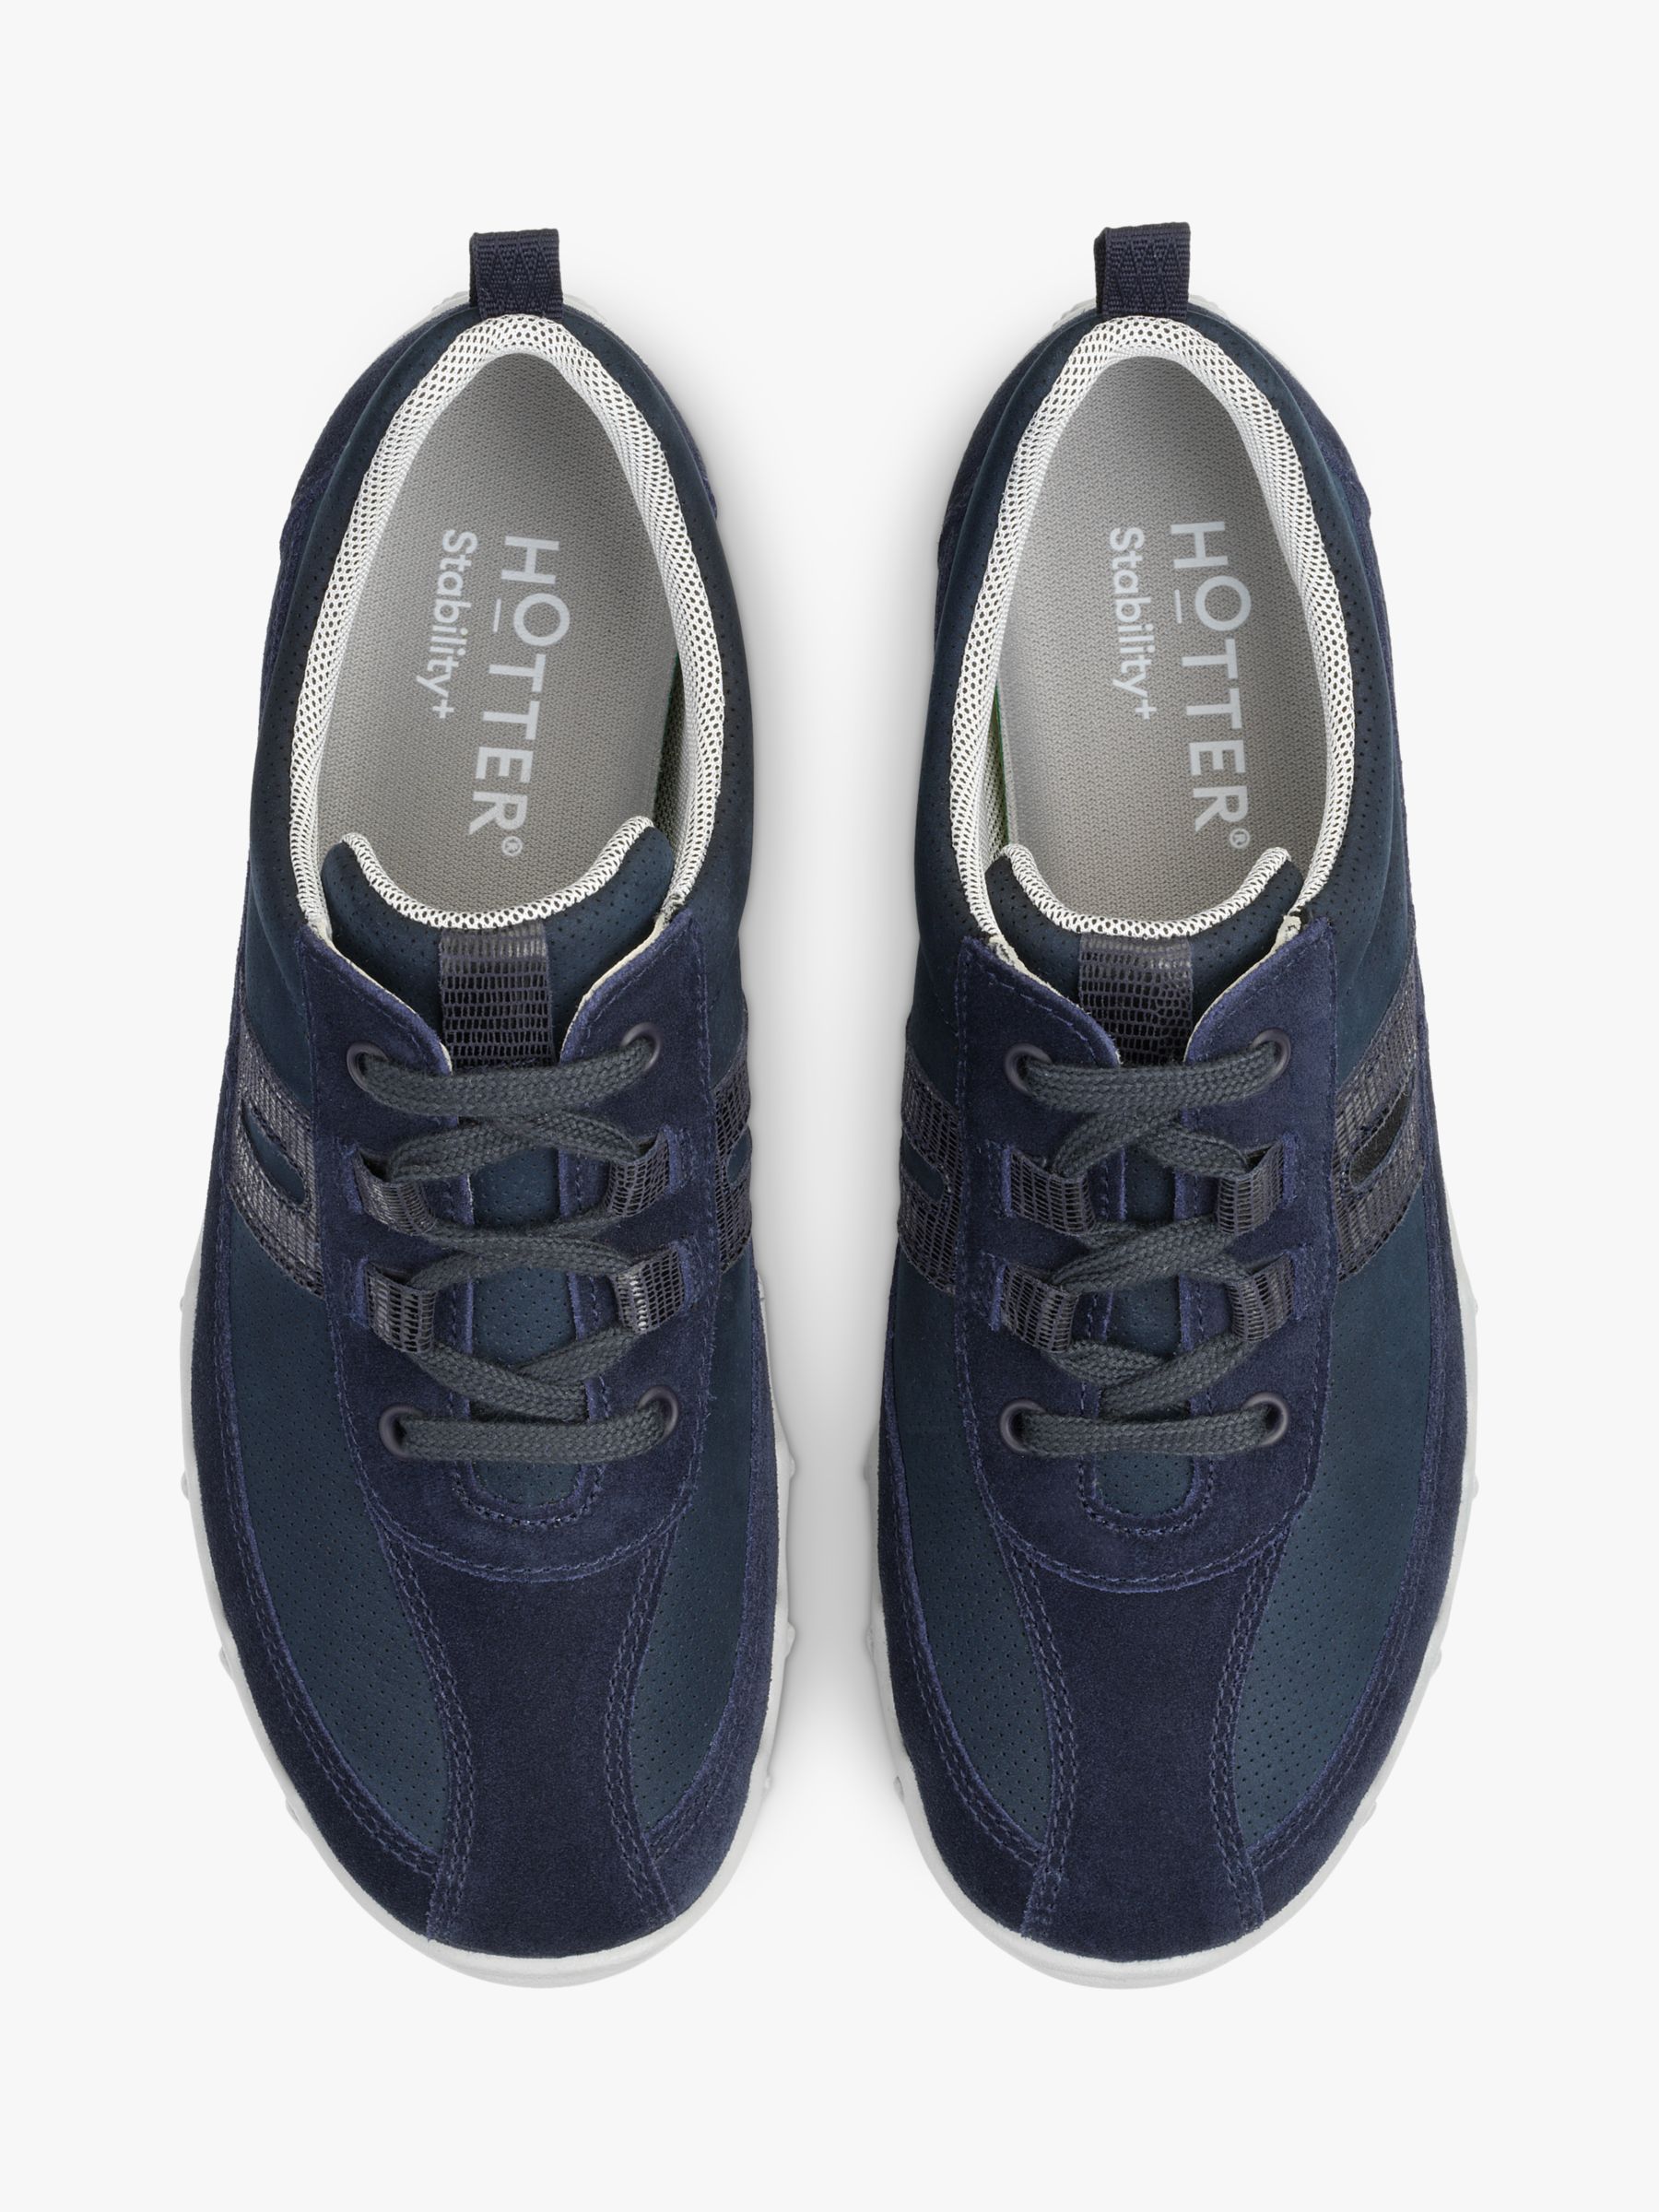 Buy Hotter Leanne II Wide Fit Suede and Nubuck Trainers, Navy Online at johnlewis.com